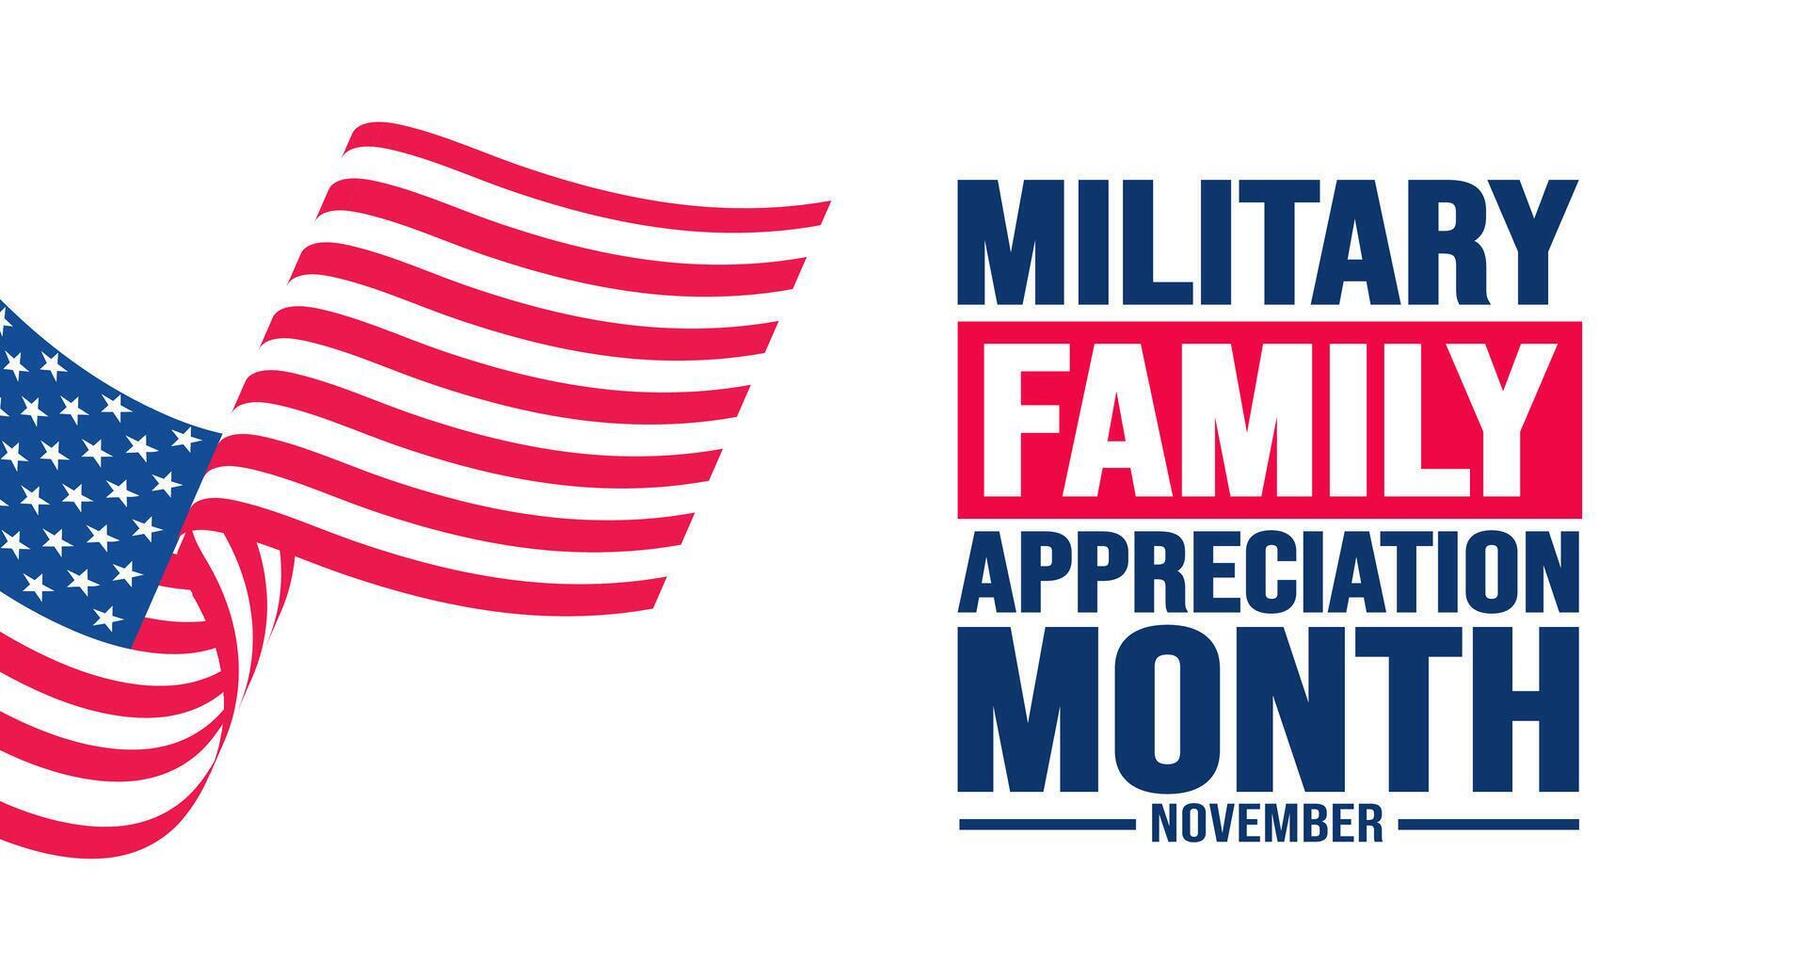 November is Military family appreciation month or Month of the Military Family background template. background, banner, placard, card, and poster design template with text inscription. vector